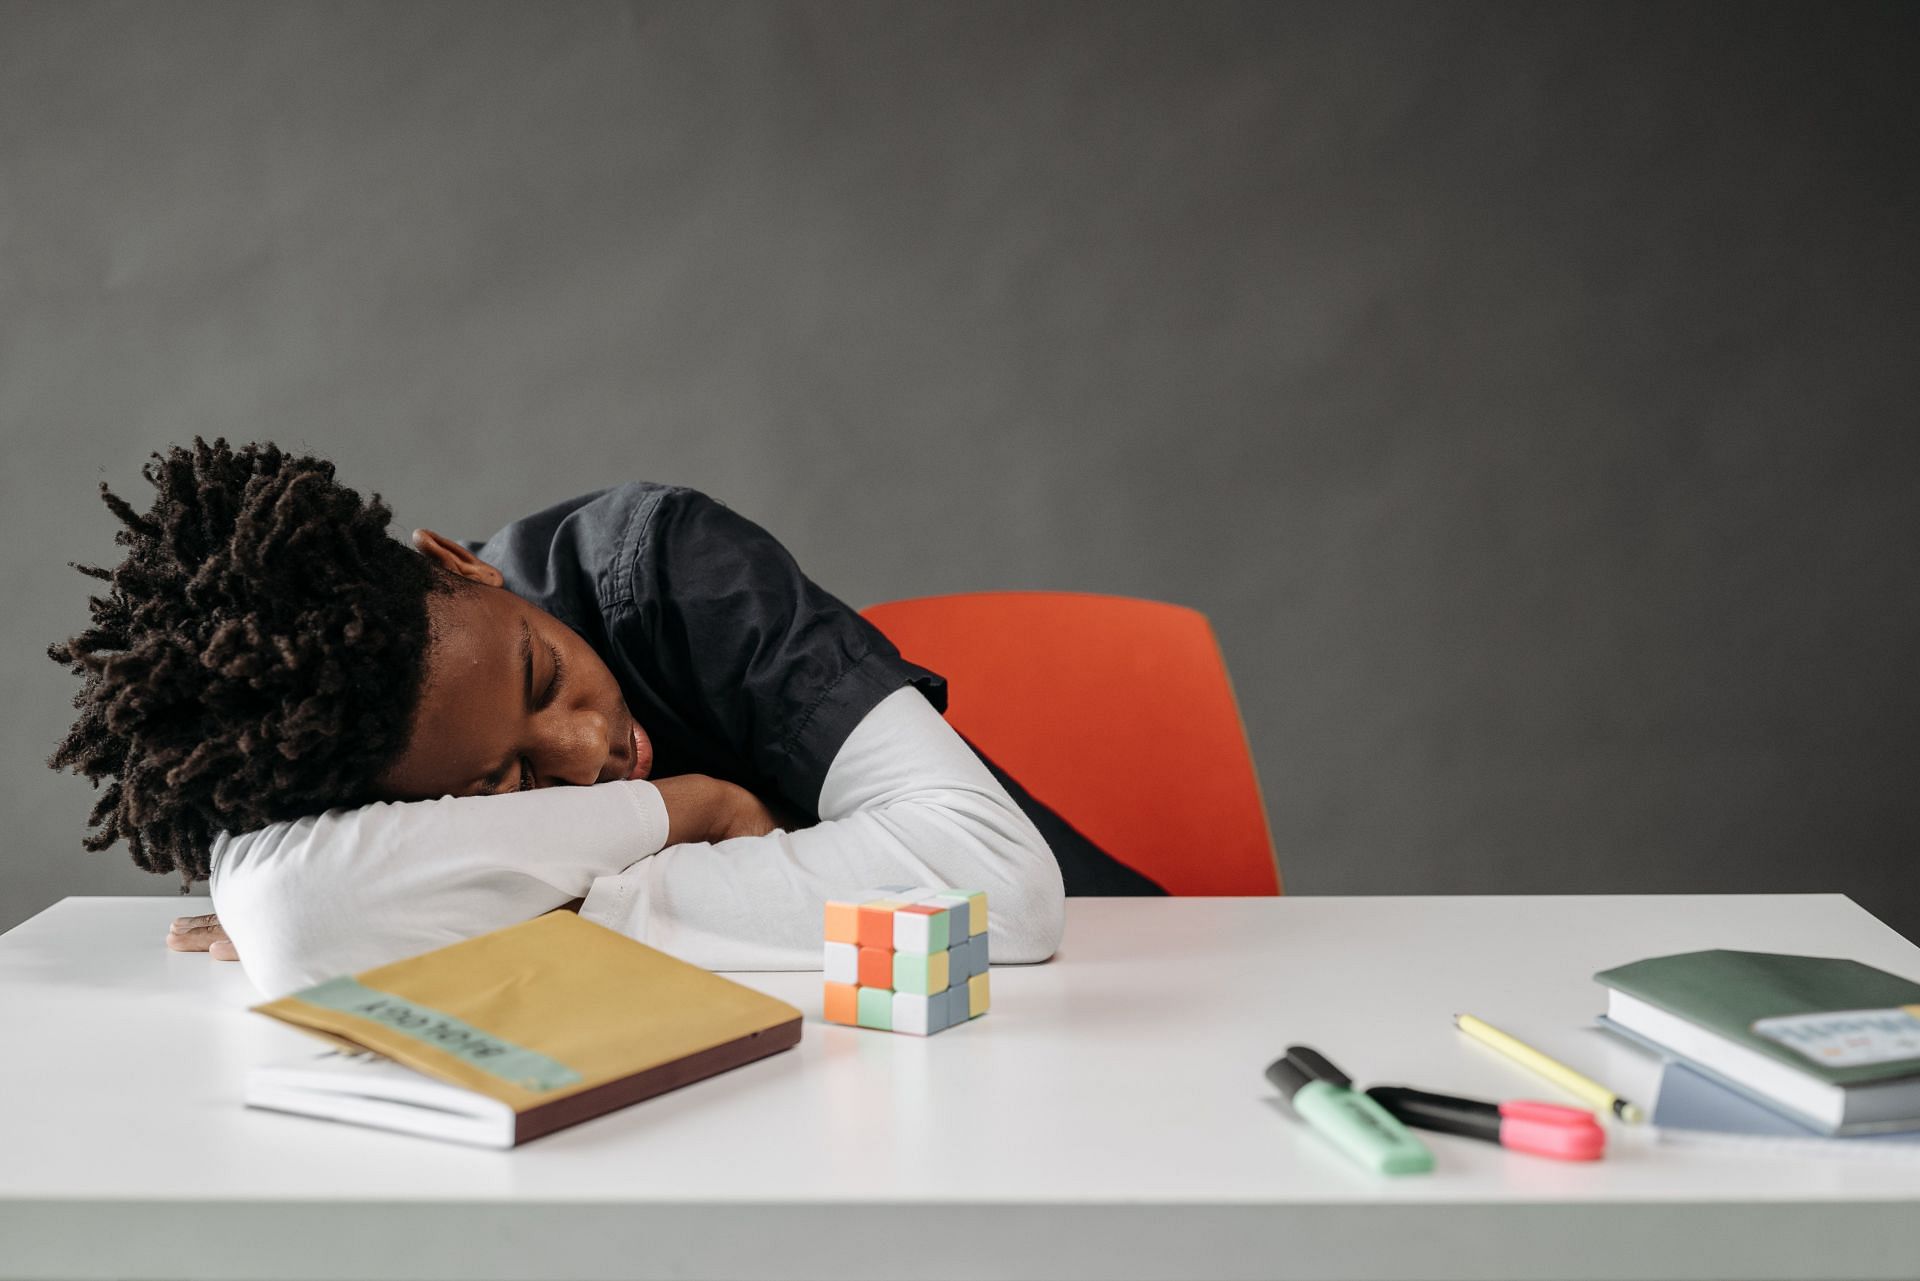 Getting enough sleep is crucial for overall health and well-being. (Image Via Pexels)